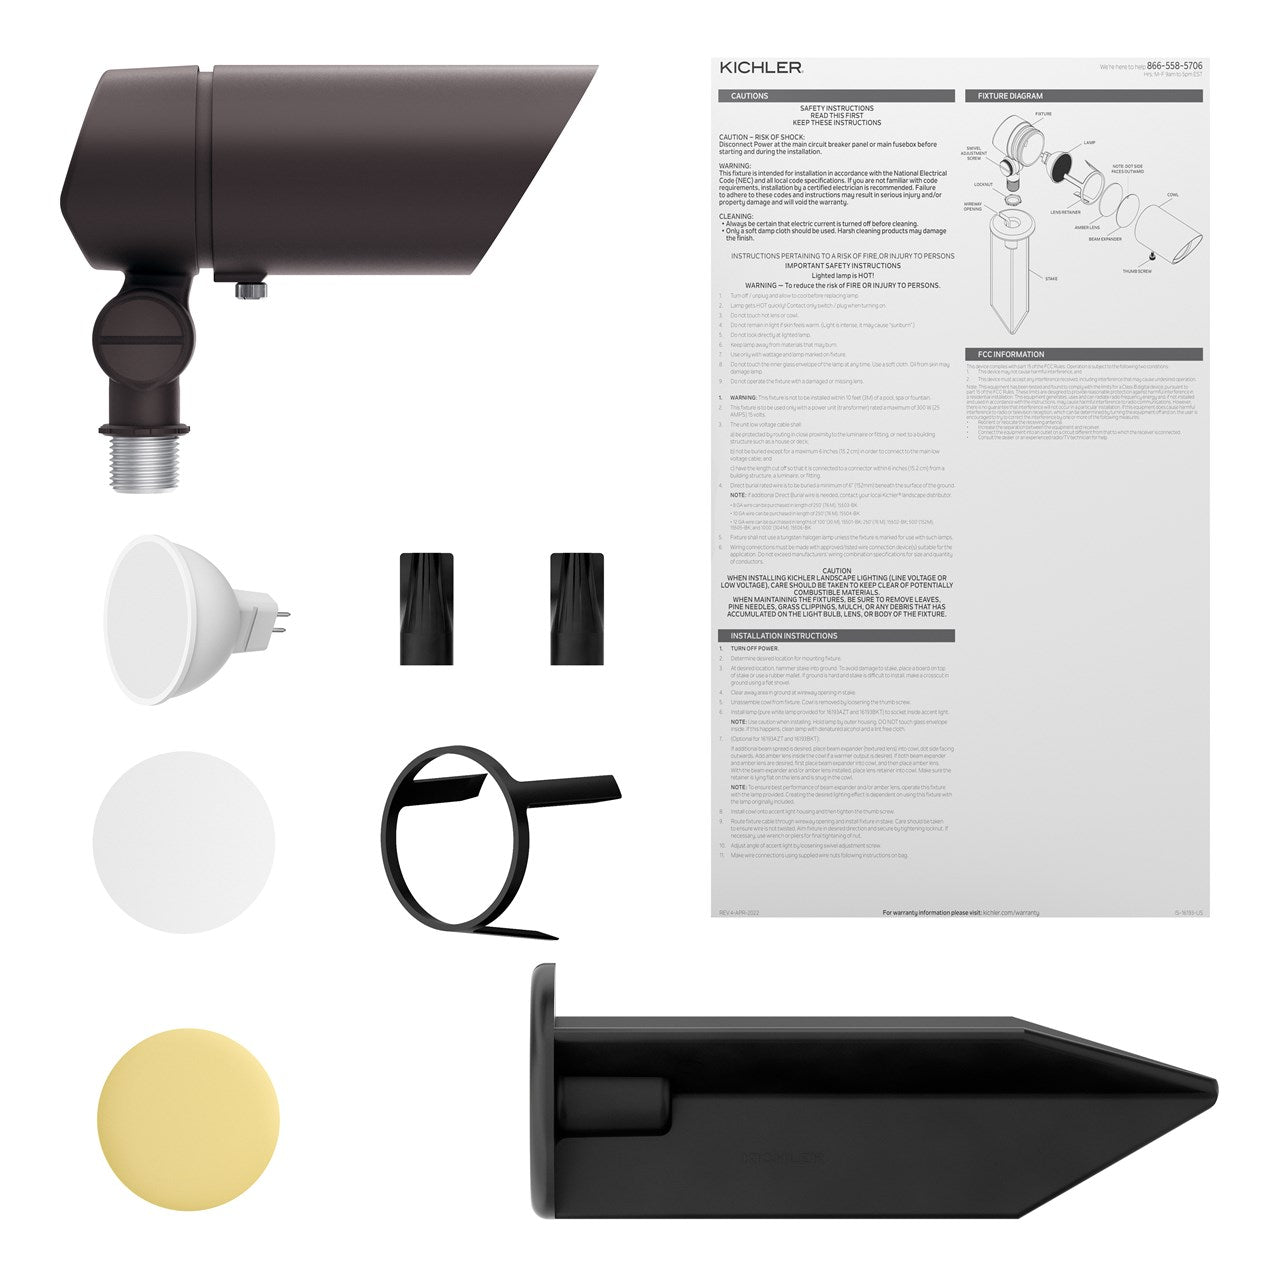 Adjustable Drop-In LED Accent Light Kit